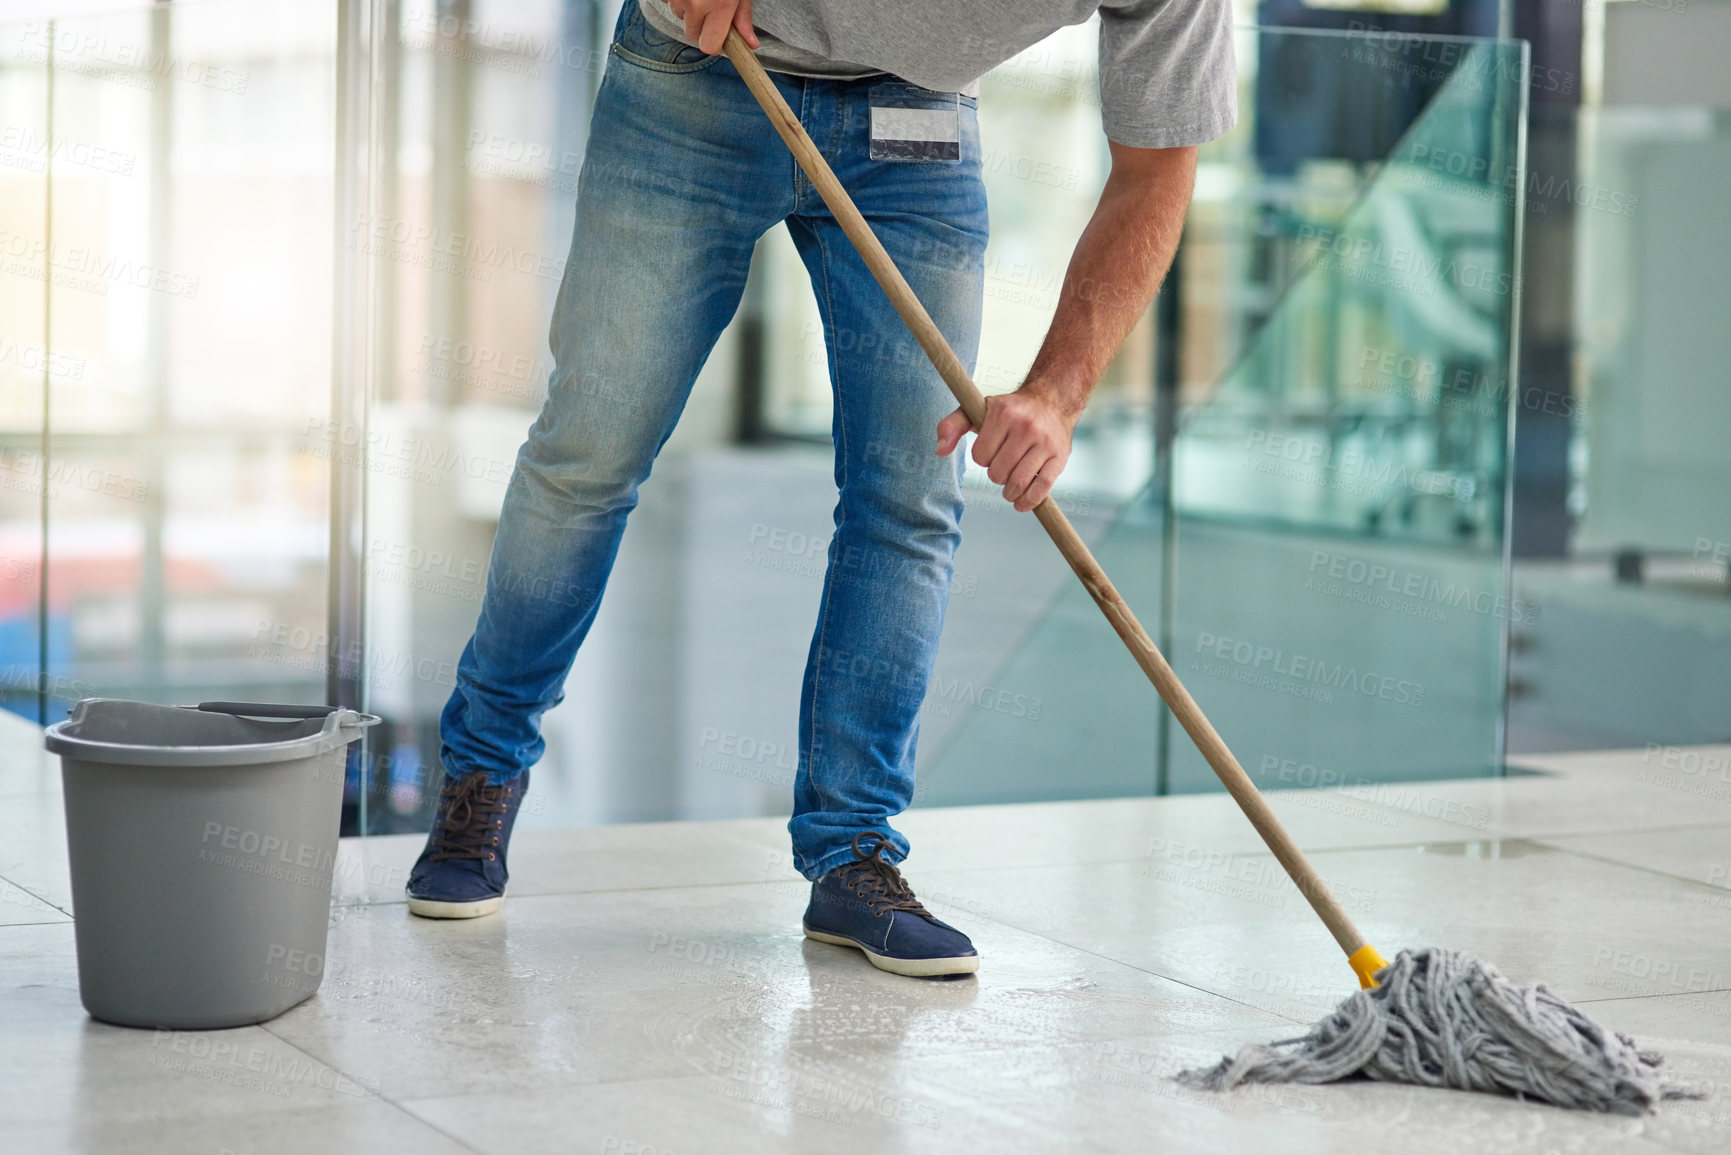 Buy stock photo Shot of an unrecognizable man mopping the office floor